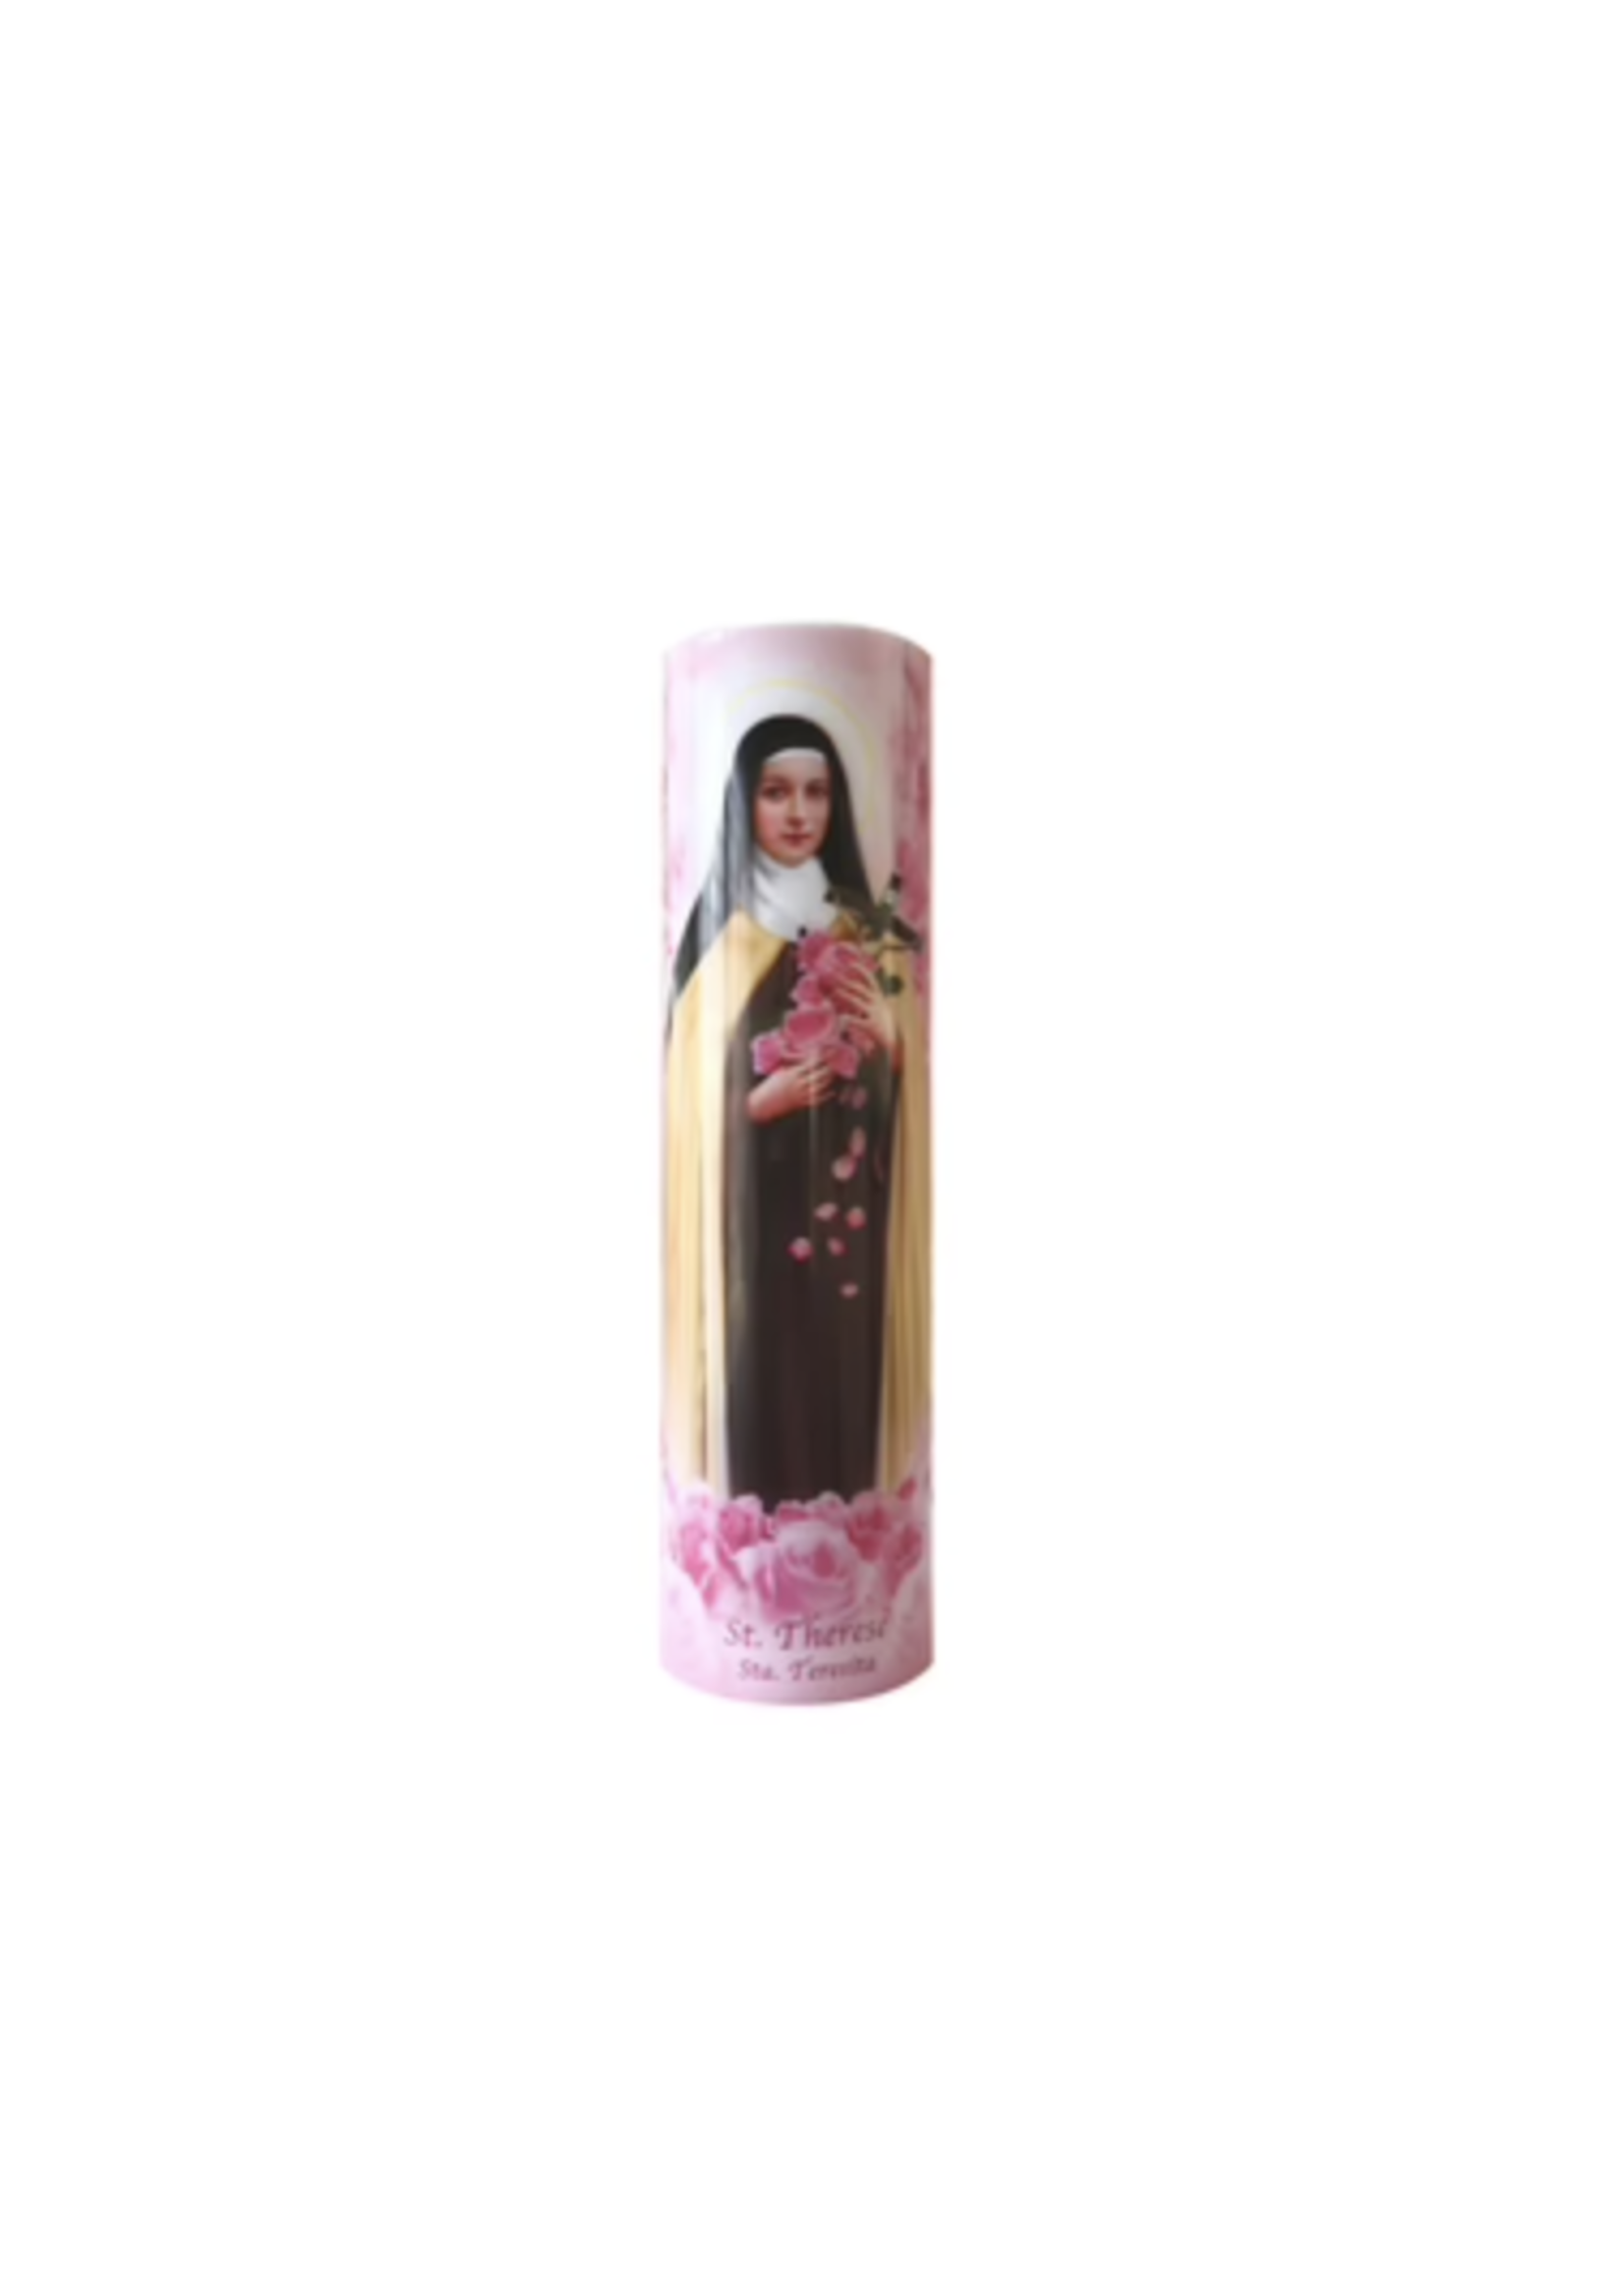 Saint Therese of Lisieux - LED Candle